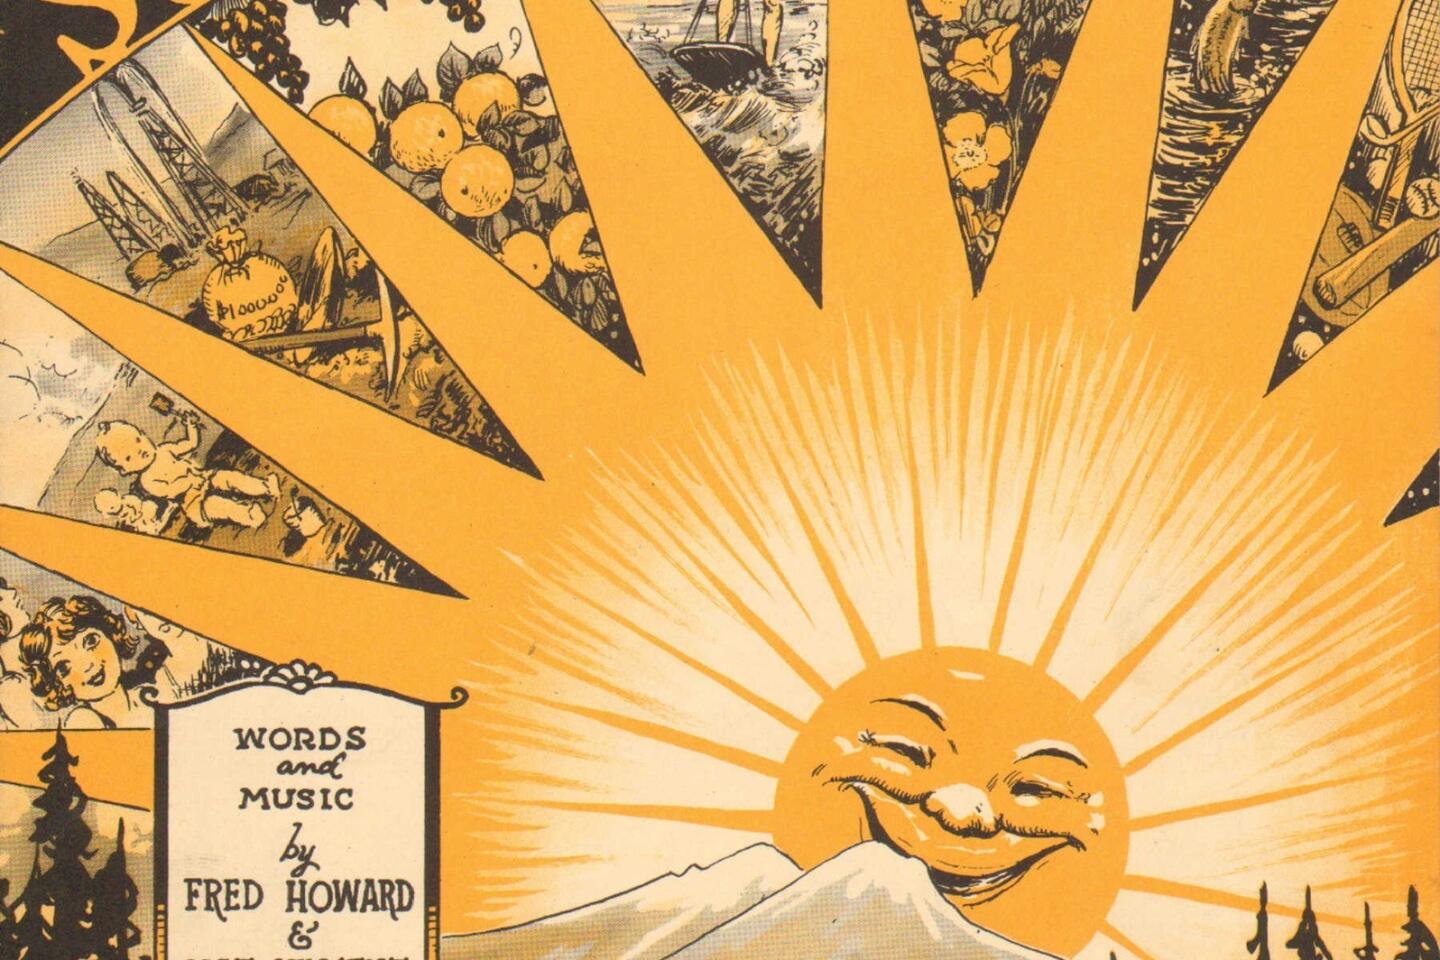 The cover for the sheet music "Make Your Mind Up to Wind Up in Sunny California," composed by Fred Howard and Nat Vincent. The sheet music is part of the 2013 book, "Songs in the Key of Los Angeles: Sheet Music From the Collection of the Los Angeles Public Library."